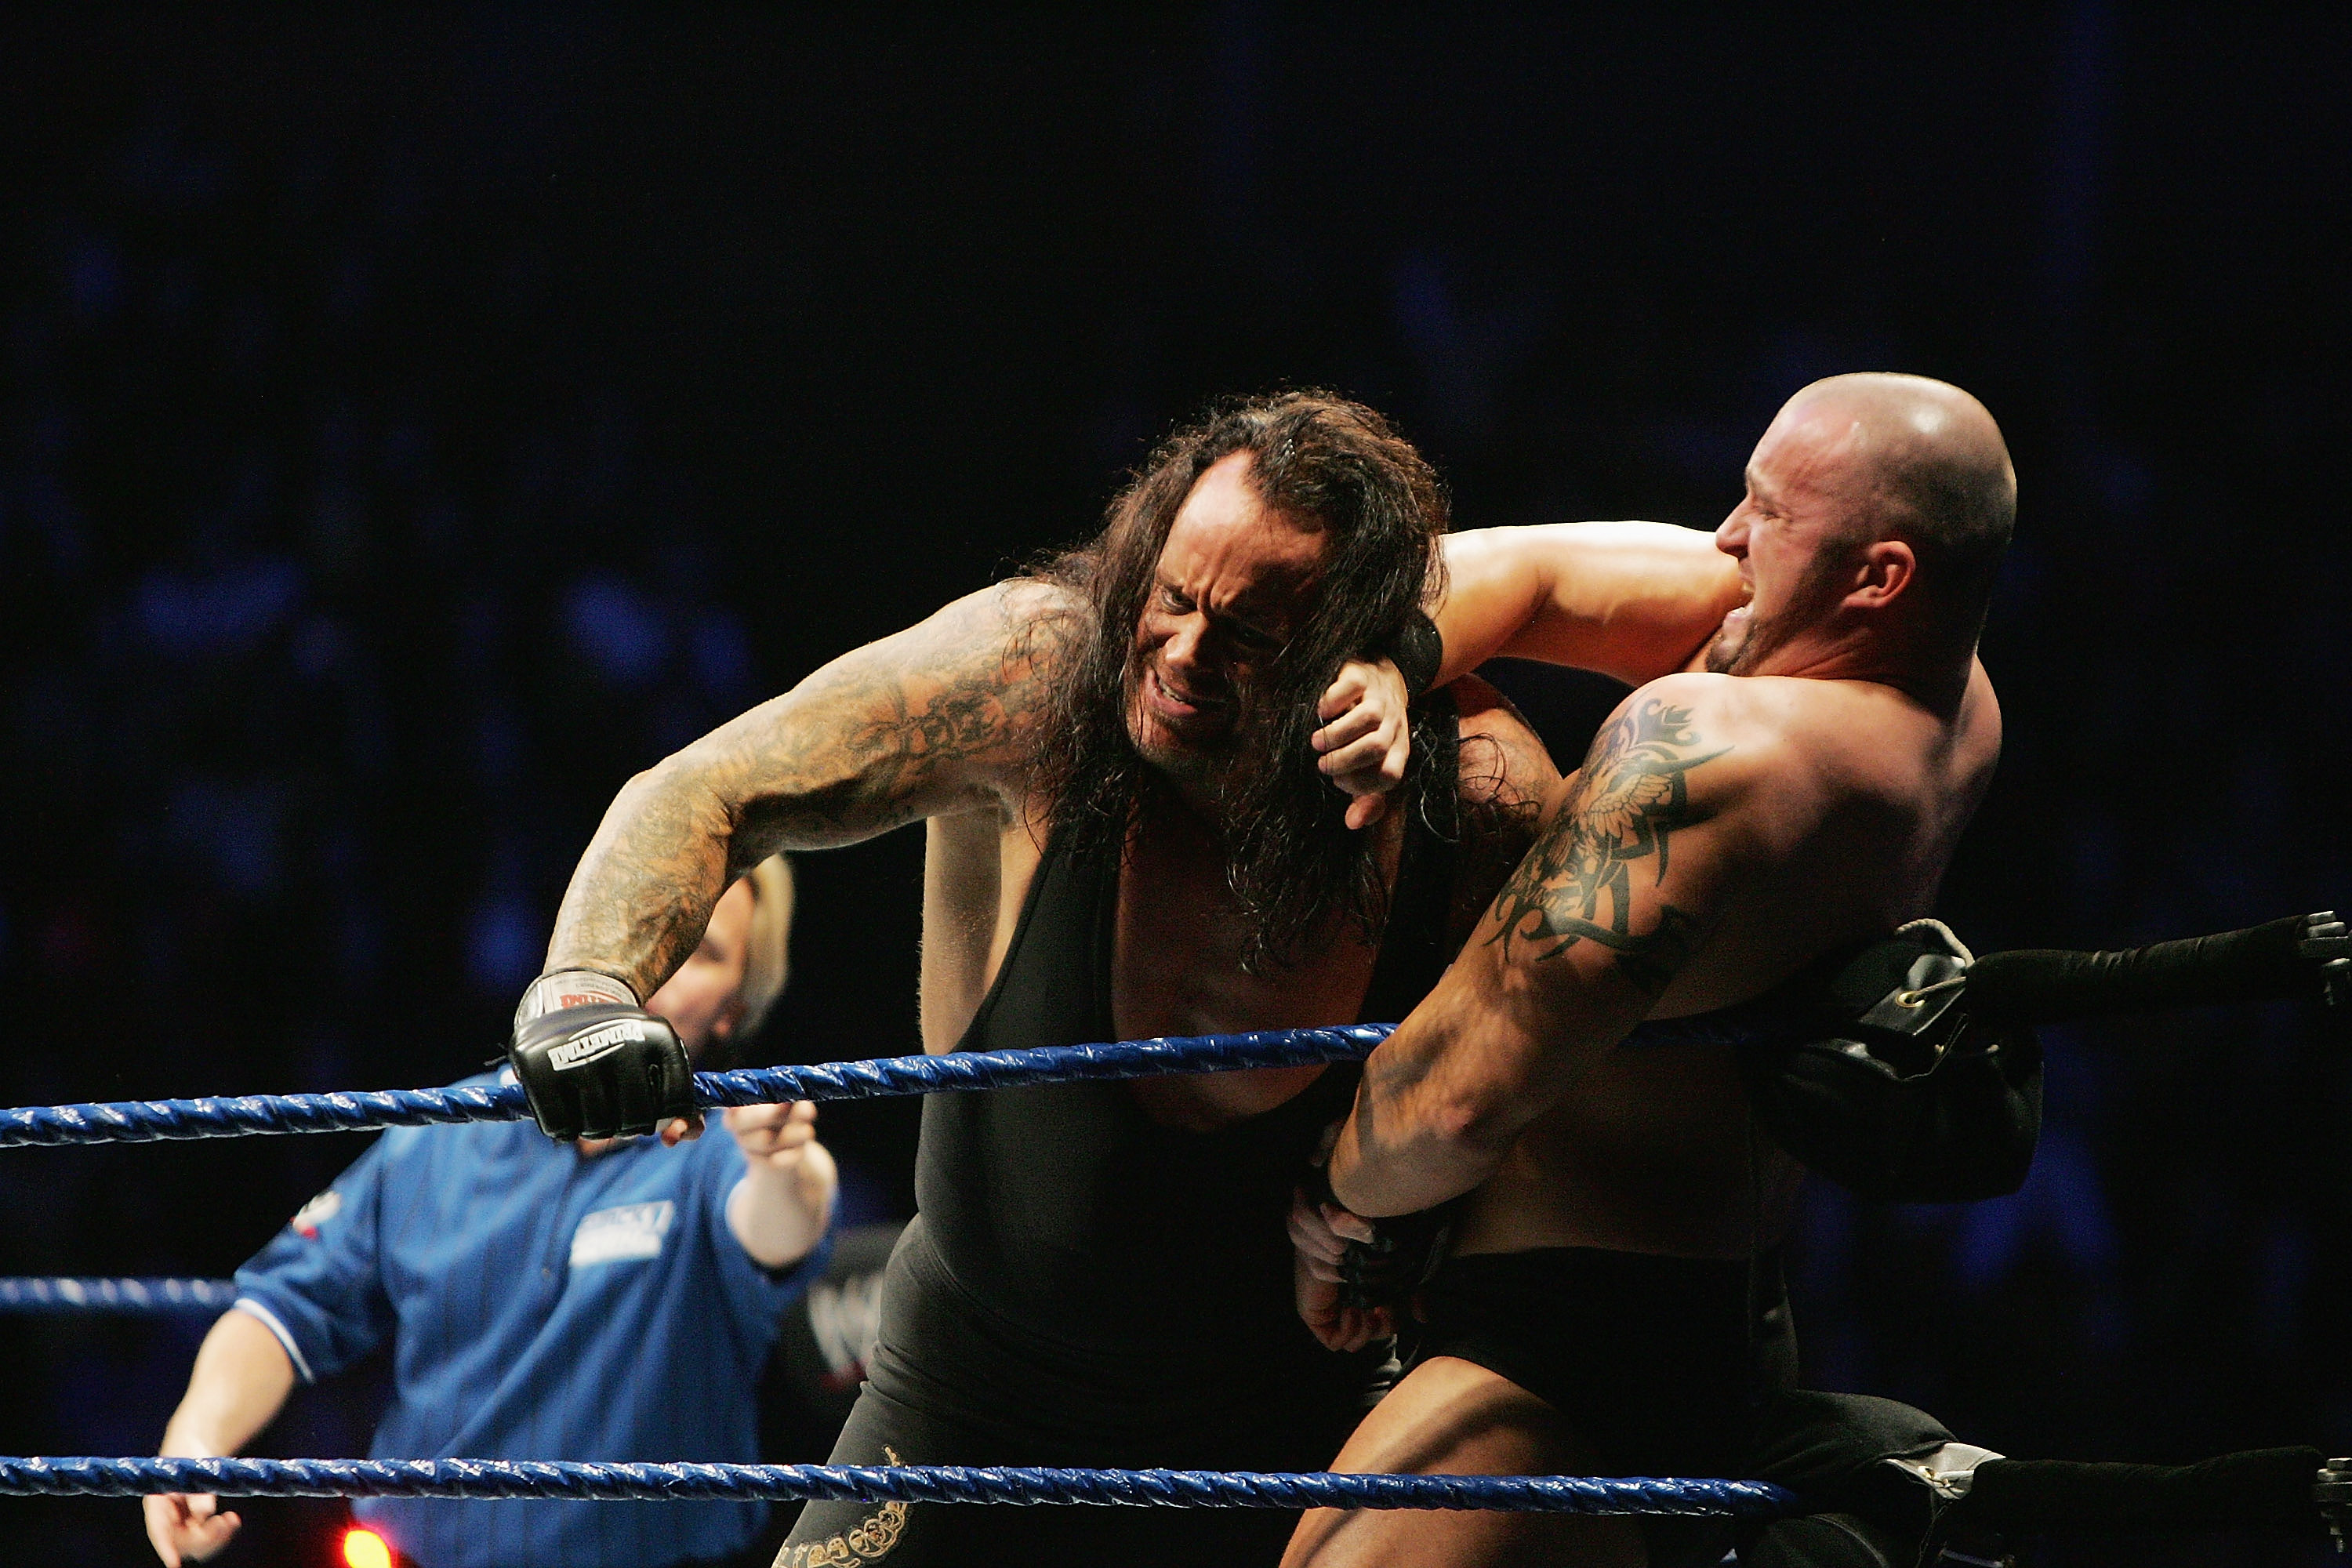 SYDNEY, AUSTRALIA - JUNE 15:  The Undertaker (L) pushes Bam Neely into the corner during WWE Smackdown at Acer Arena on June 15, 2008 in Sydney, Australia.  (Photo by Gaye Gerard/Getty Images)